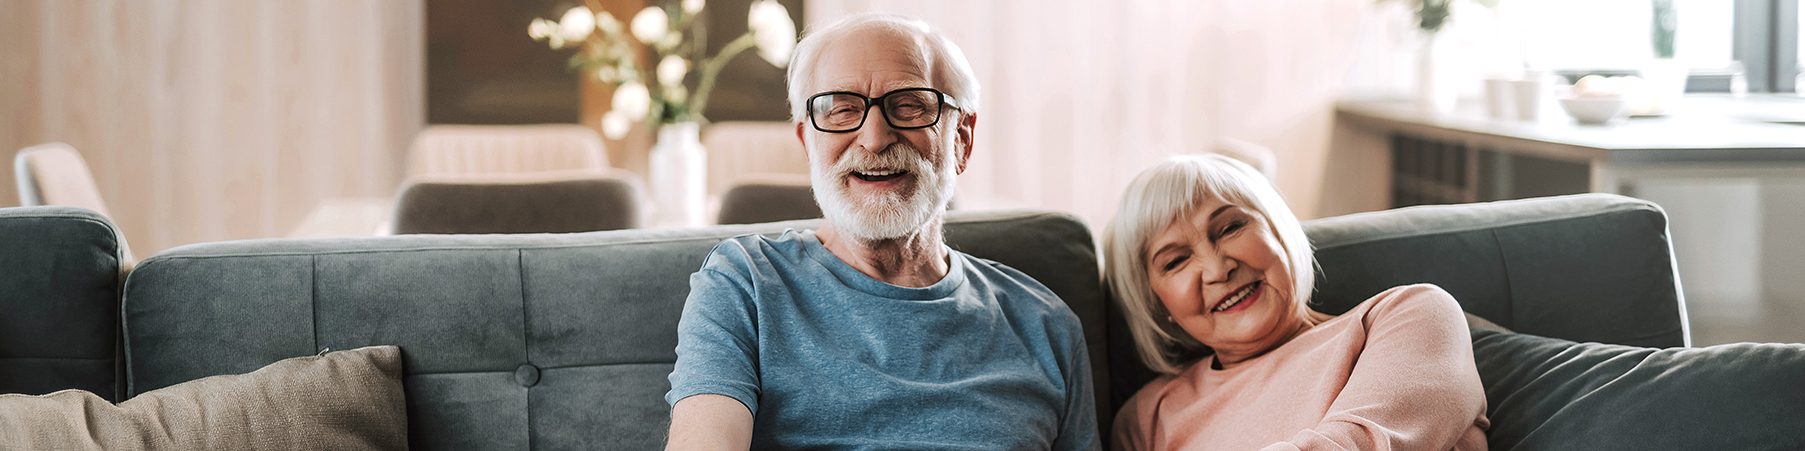 Happy elderly couple at home on couch